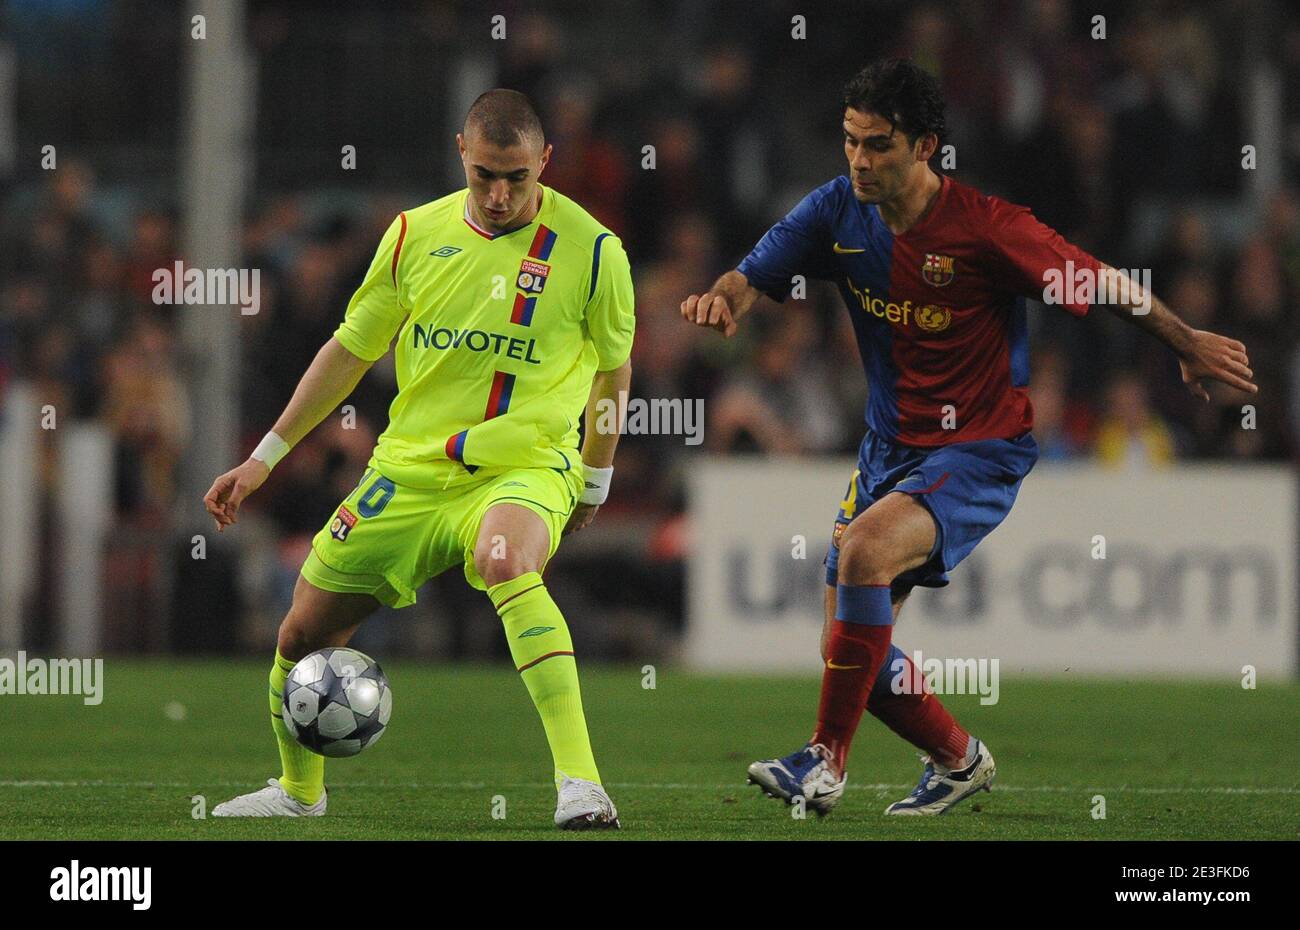 Lyon's Karim Benzema during the Champions League second leg first knockout  round soccer match, Barcelona vs Olympique Lyonnais at the Nou Camp, in  Barcelona, Spain on March 11, 2009. Barcelona won 5-2